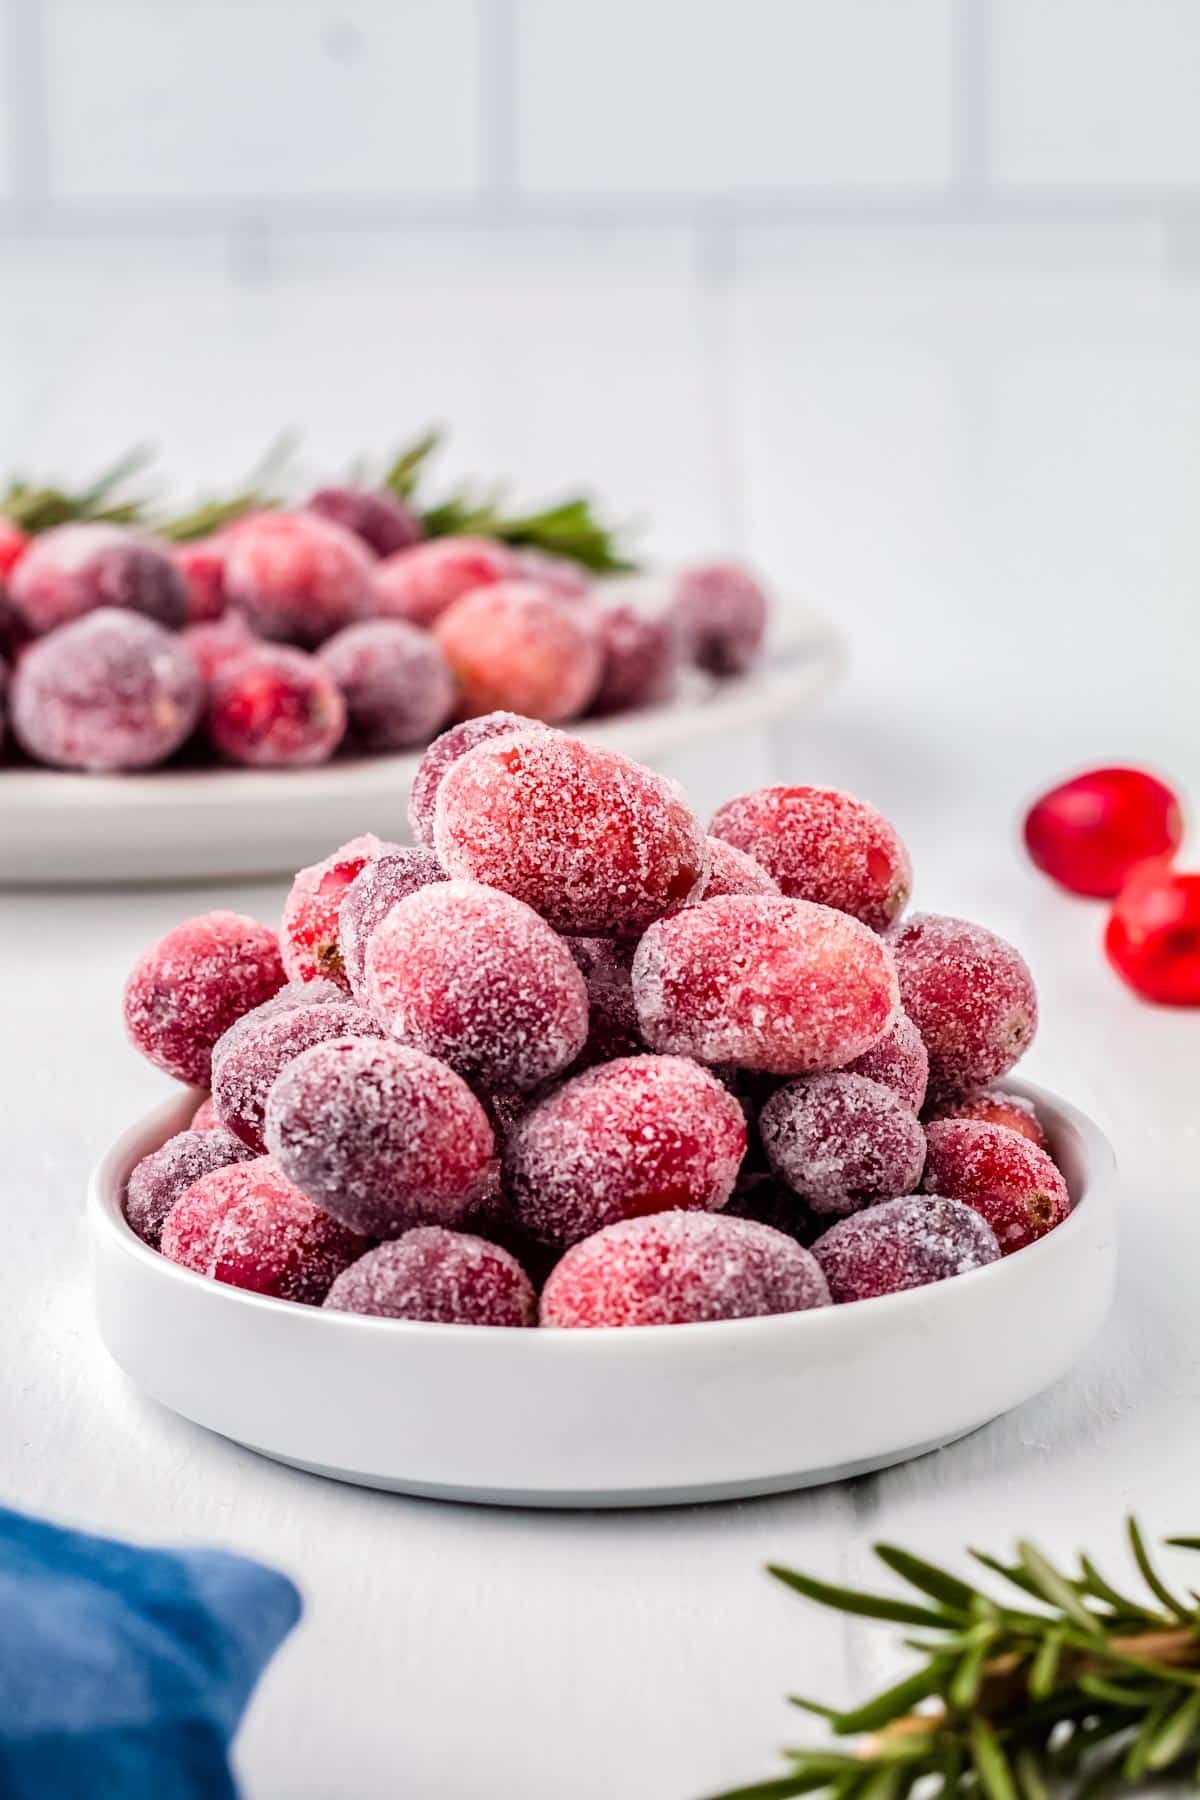 The Sugar Coated Cranberries in a serving bowl with more in the background.